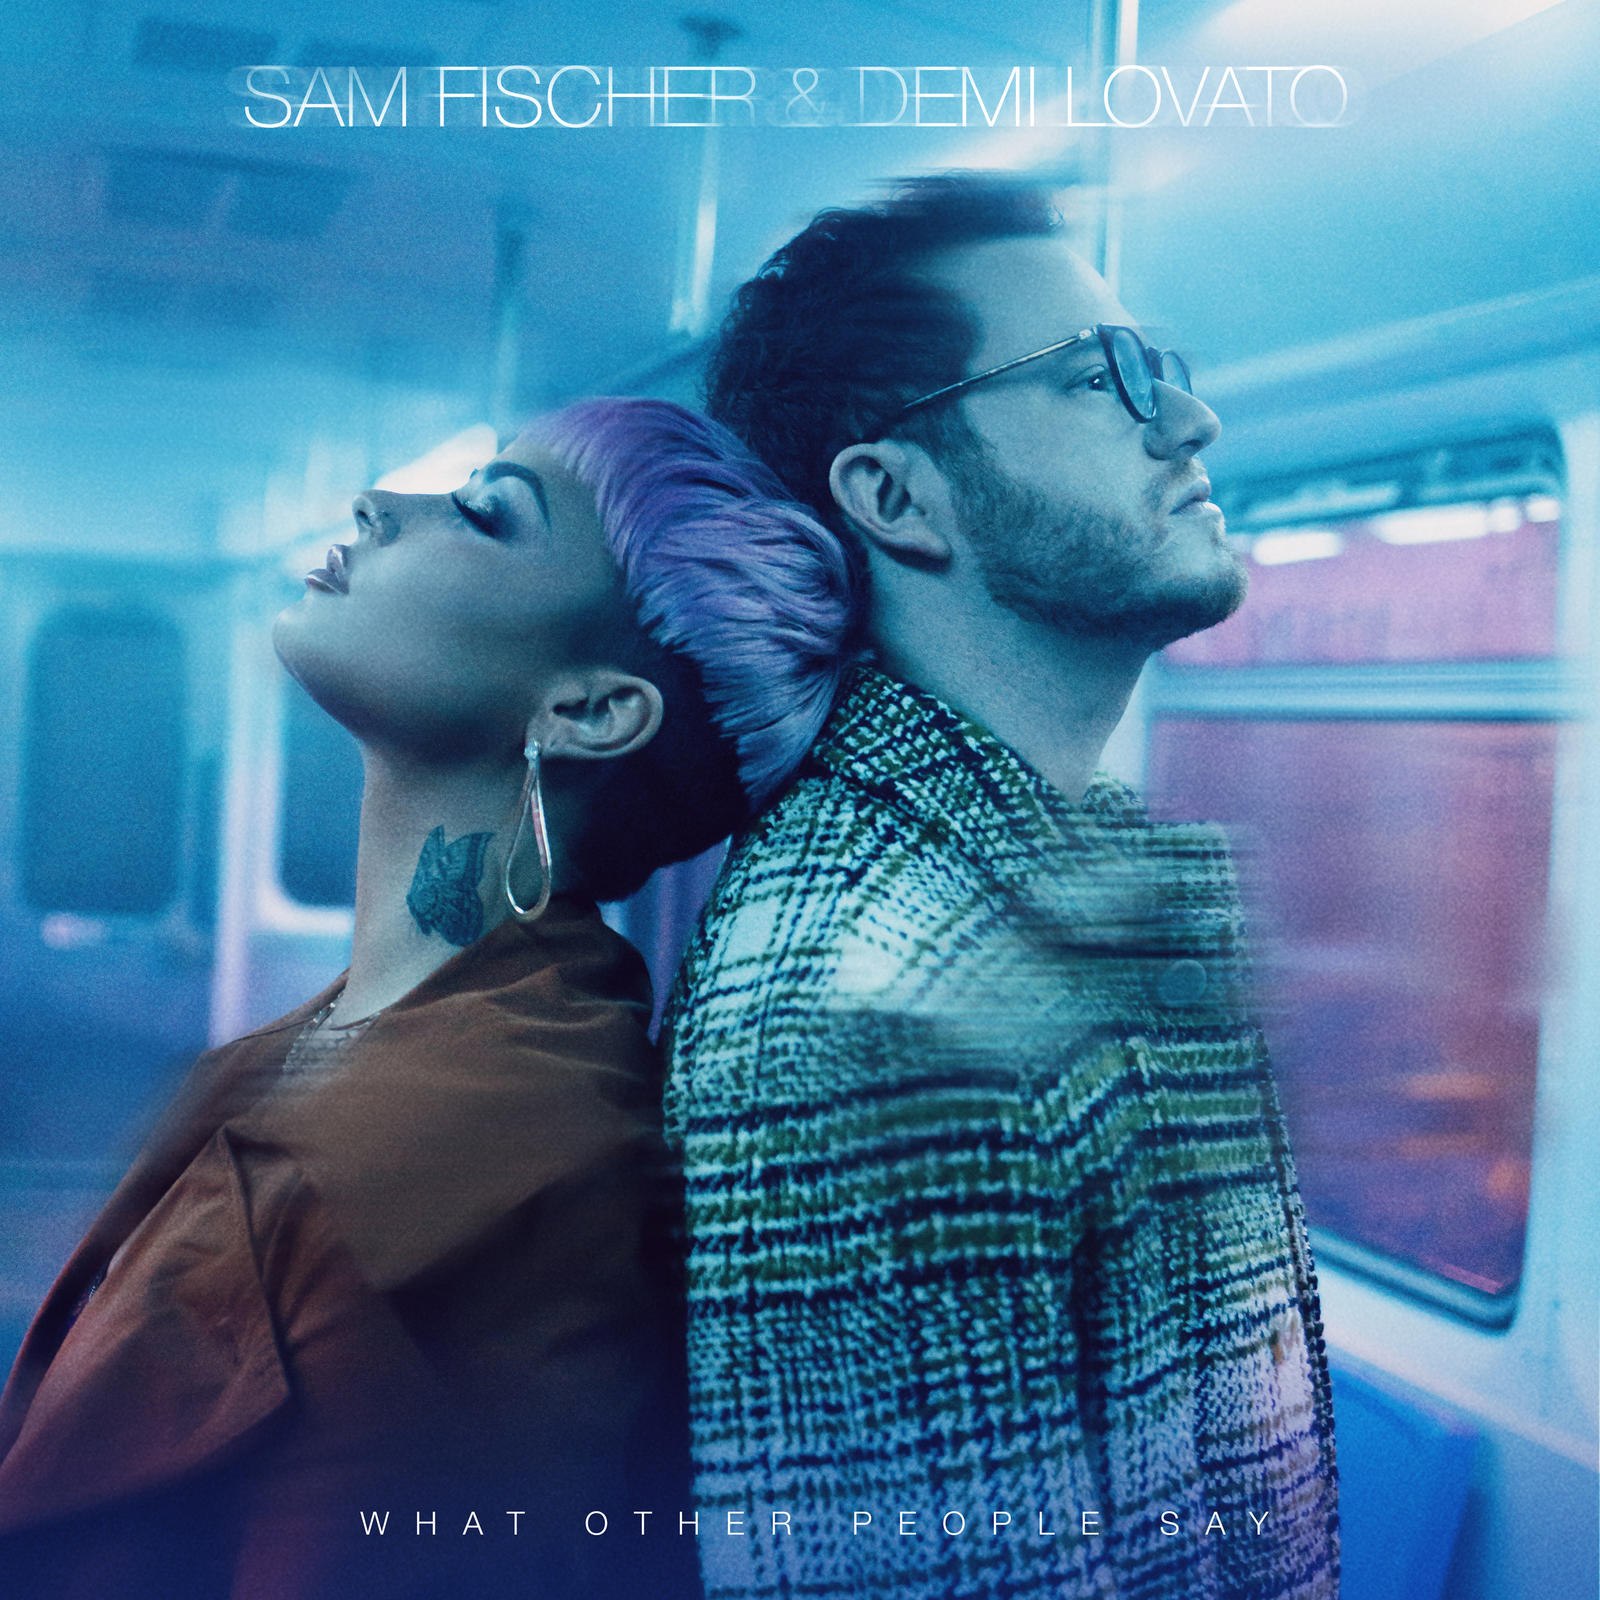 Sam Fischer and Demi Lovato turn emotional on “What Other People Say” music video